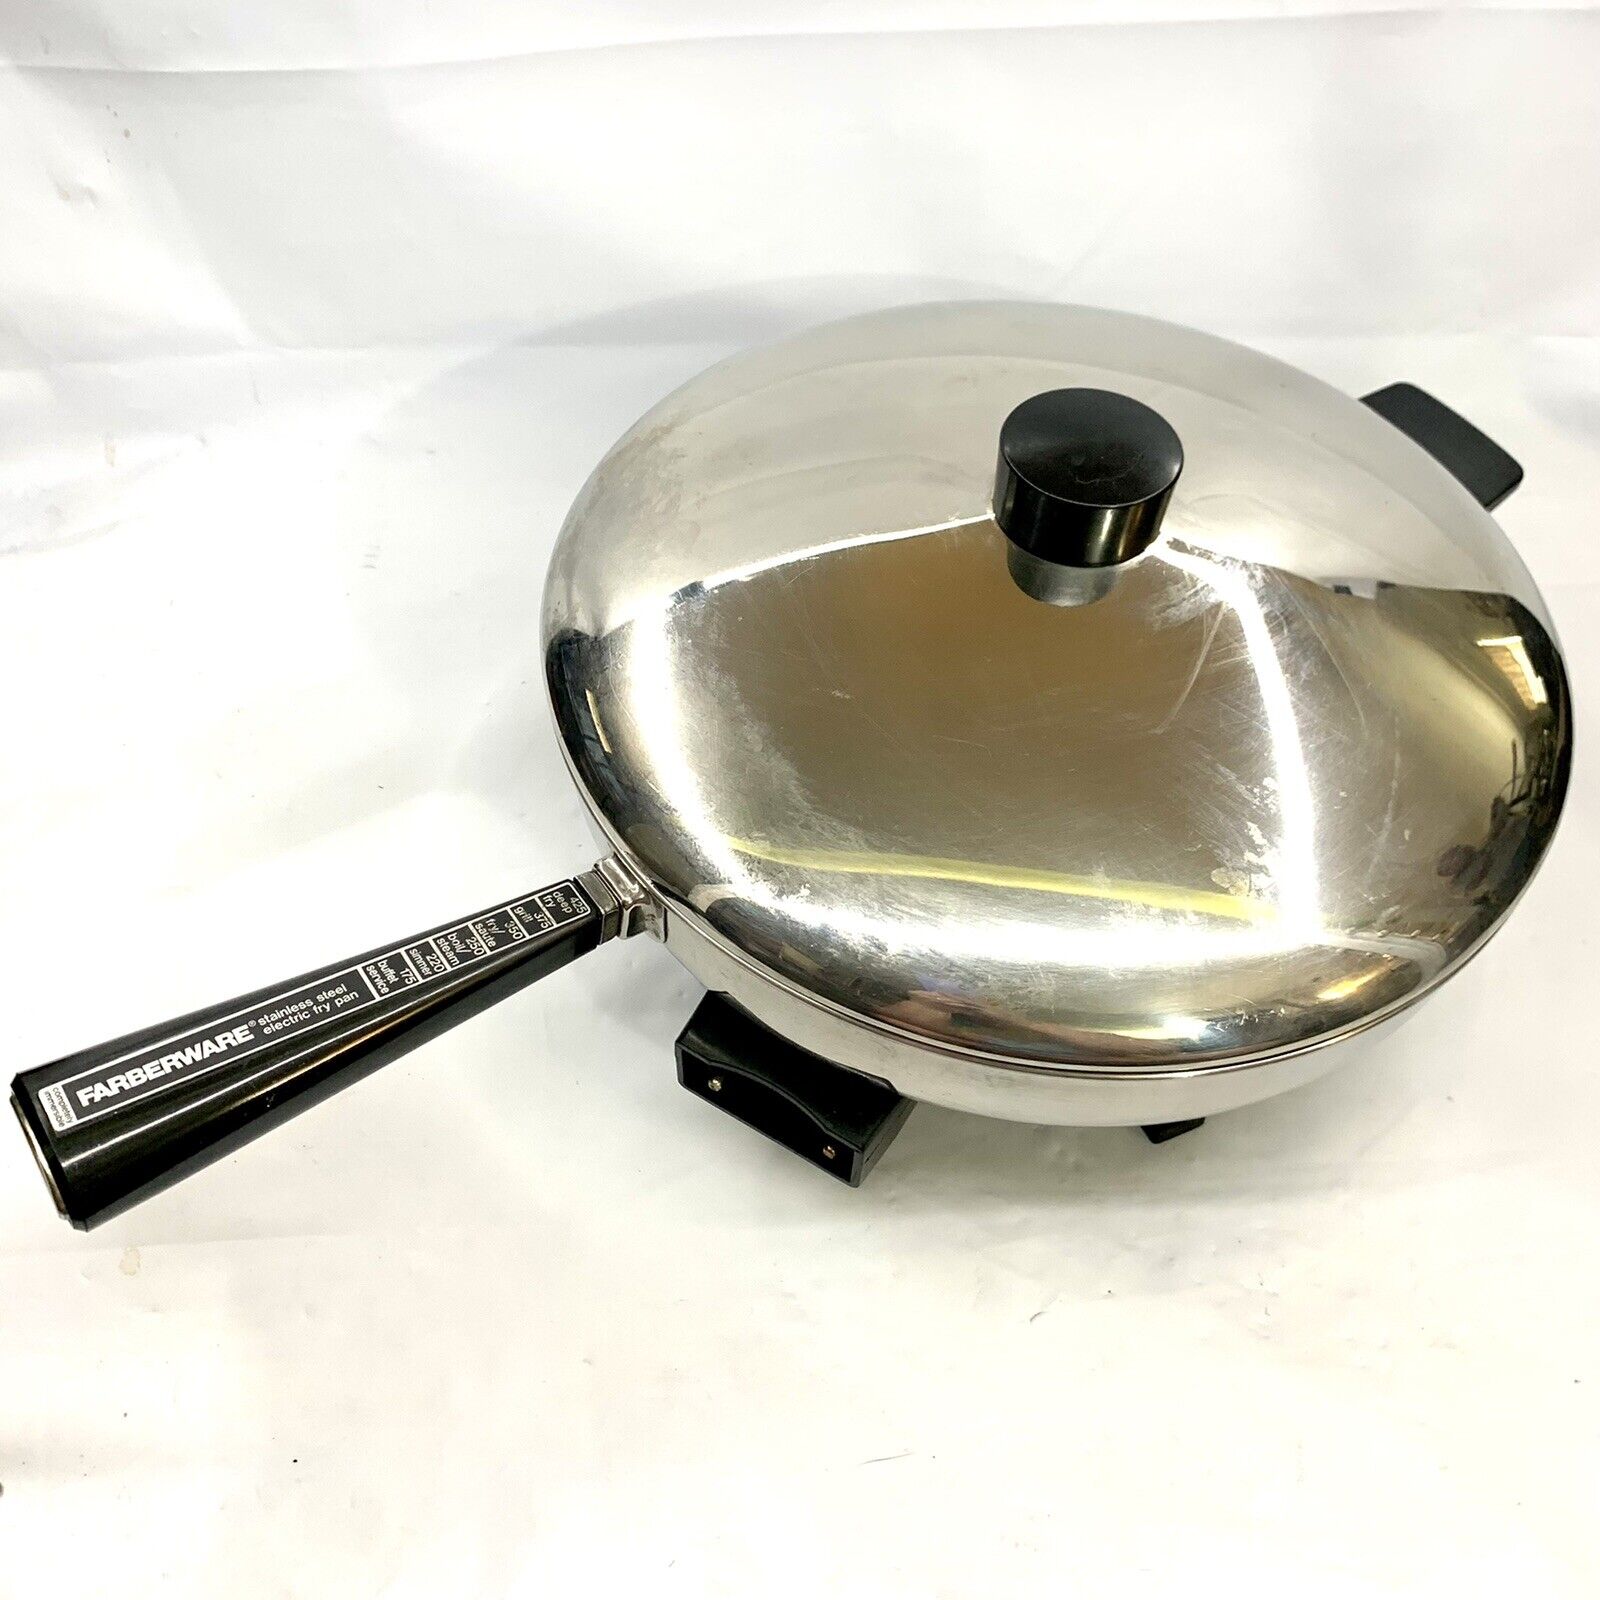 Farberware electric fry pan - appliances - by owner - sale